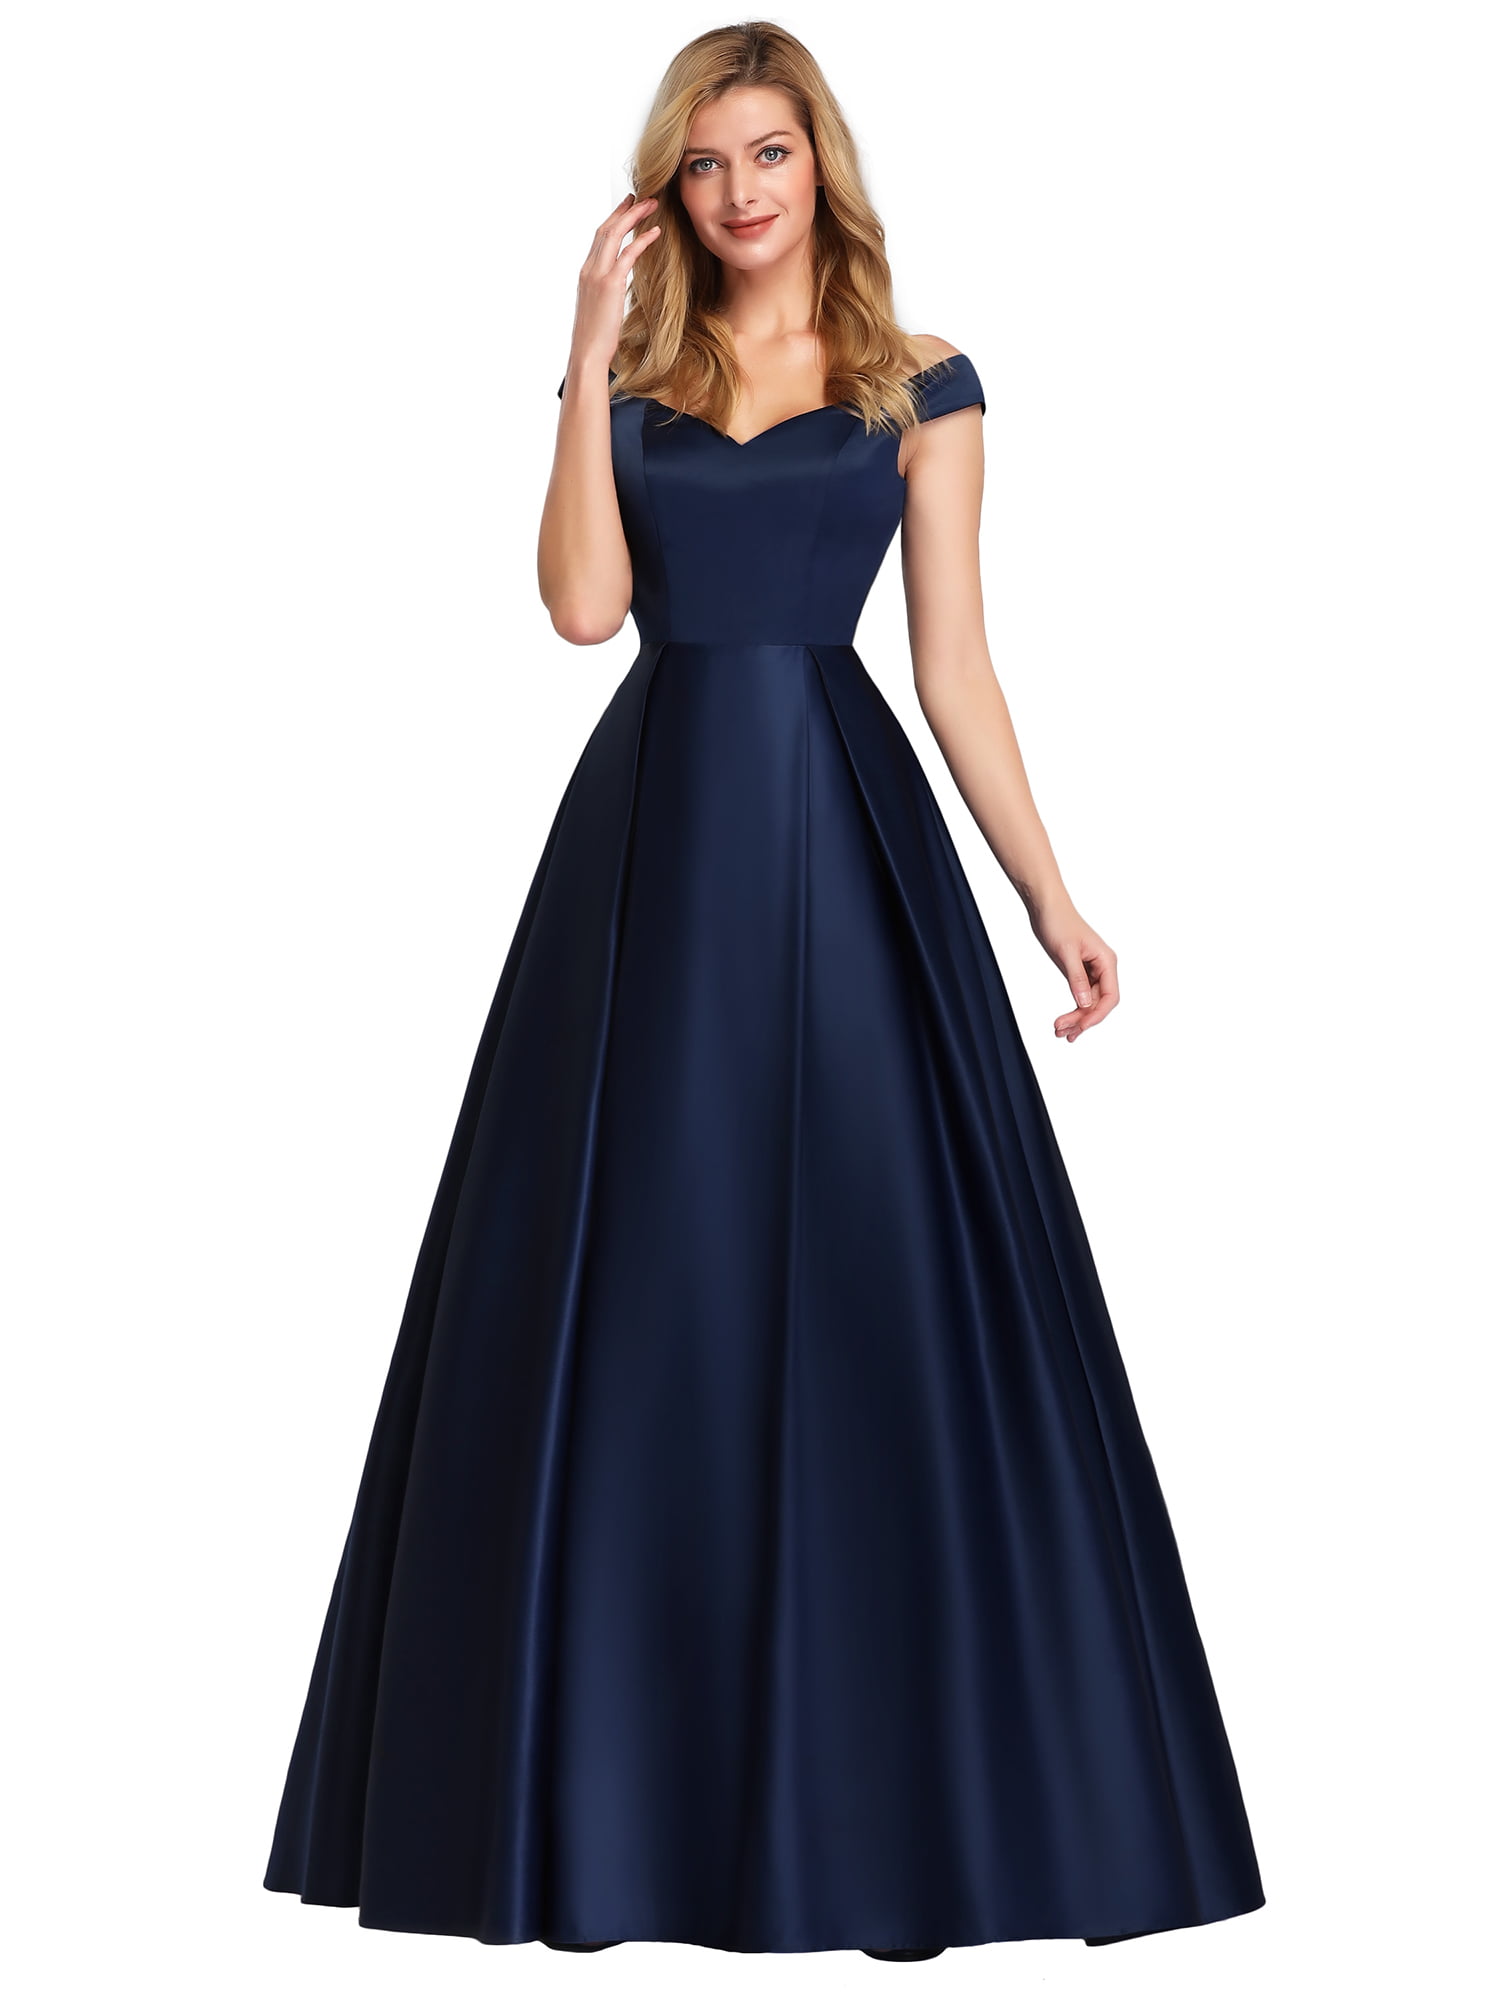 Ever Pretty Women's Wedding Gowns Evening Bridesmaid Prom Party Dress 